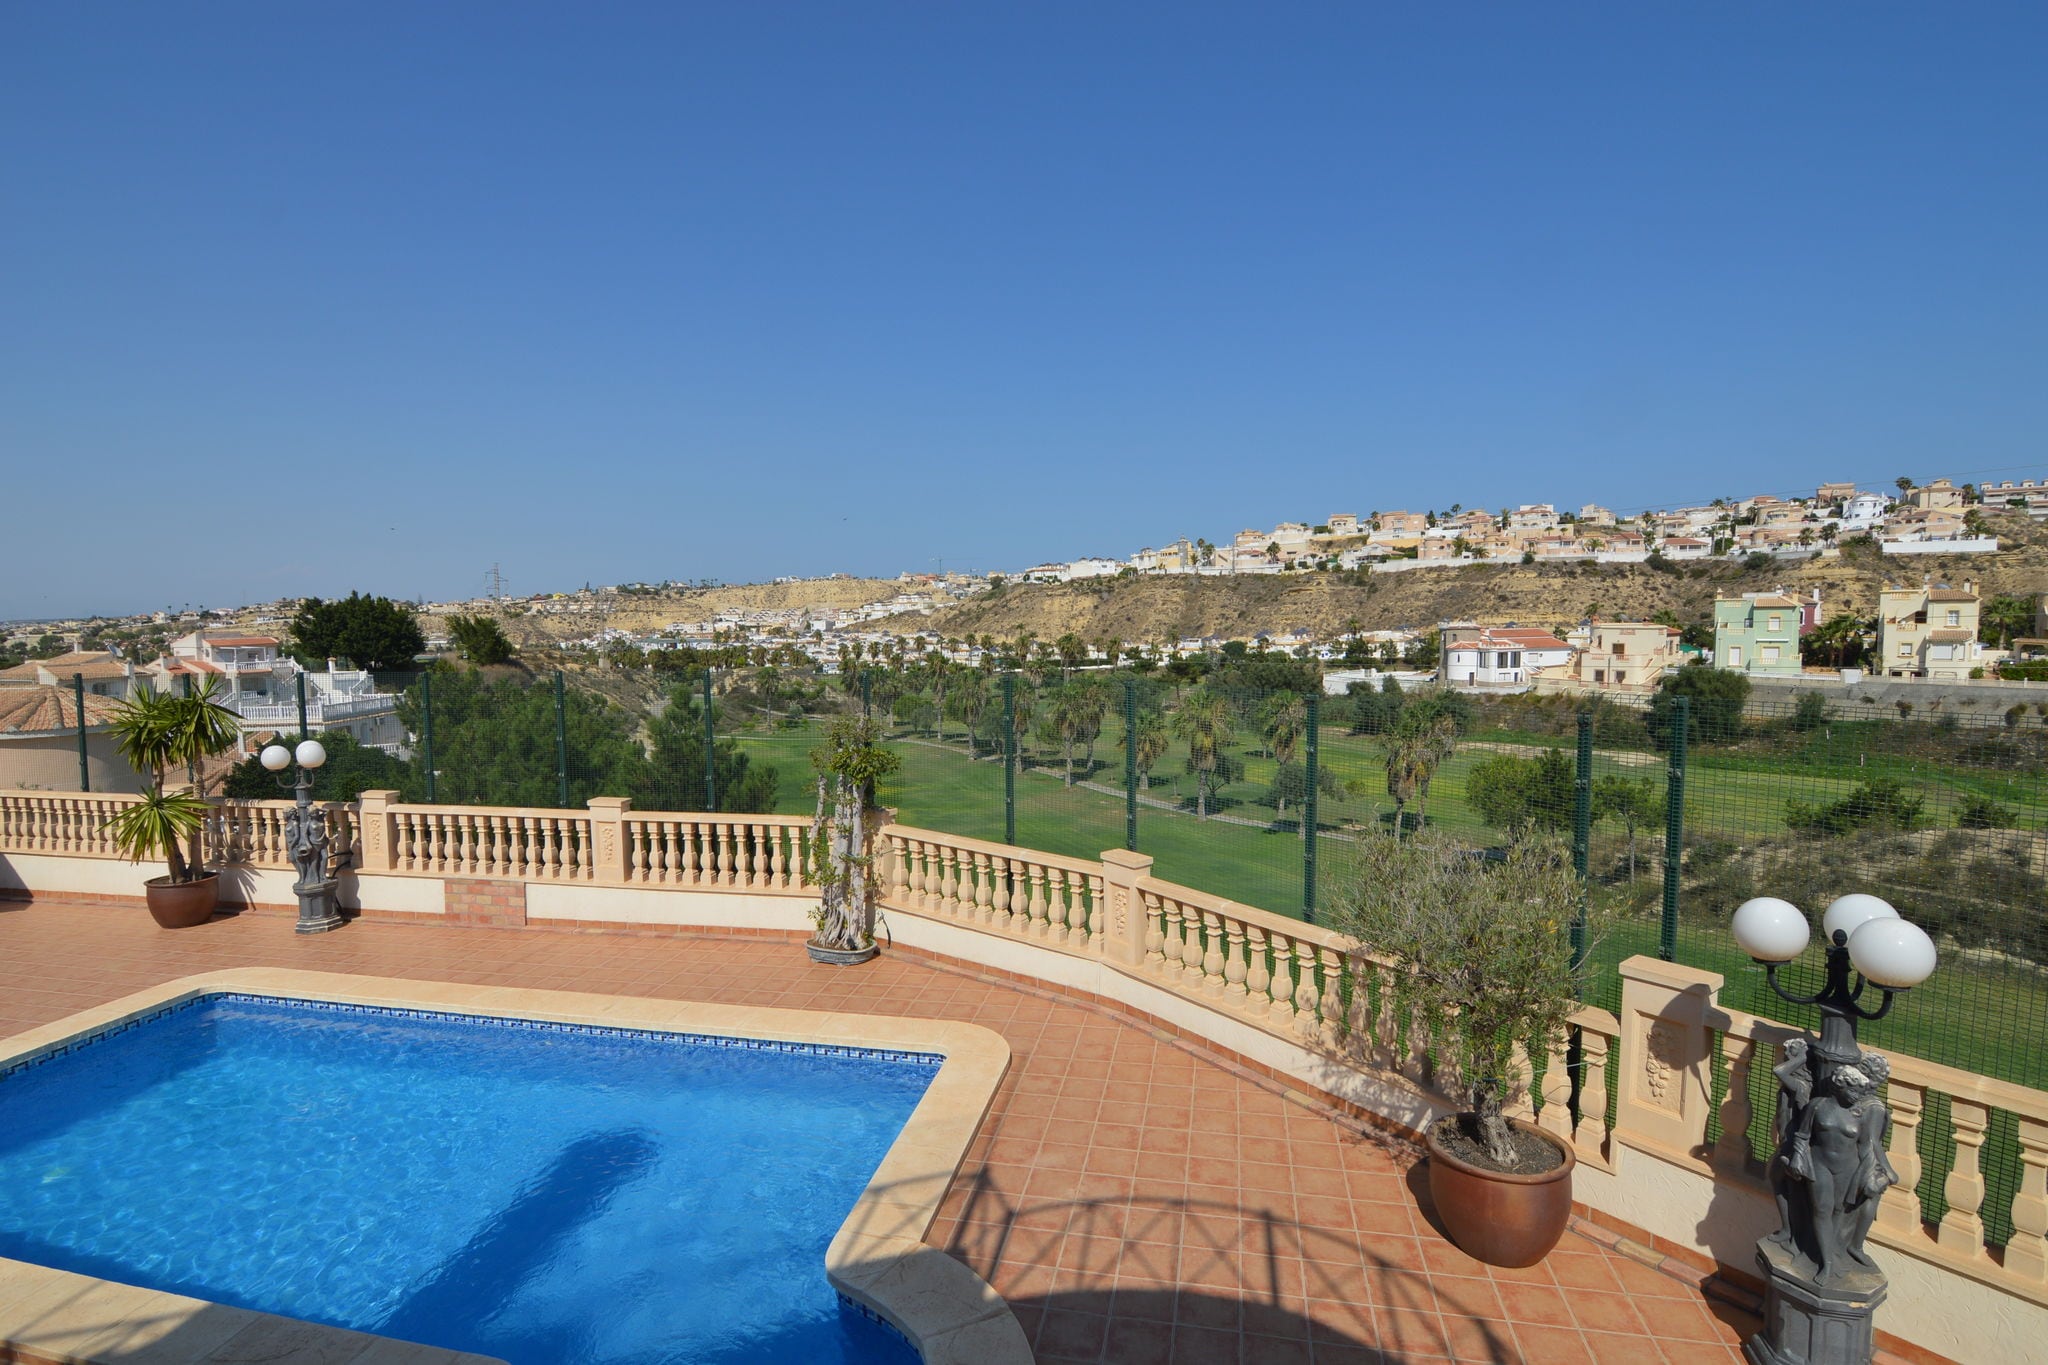 Detached villa with a swimming pool and amazing view of the La Marquesa golf course